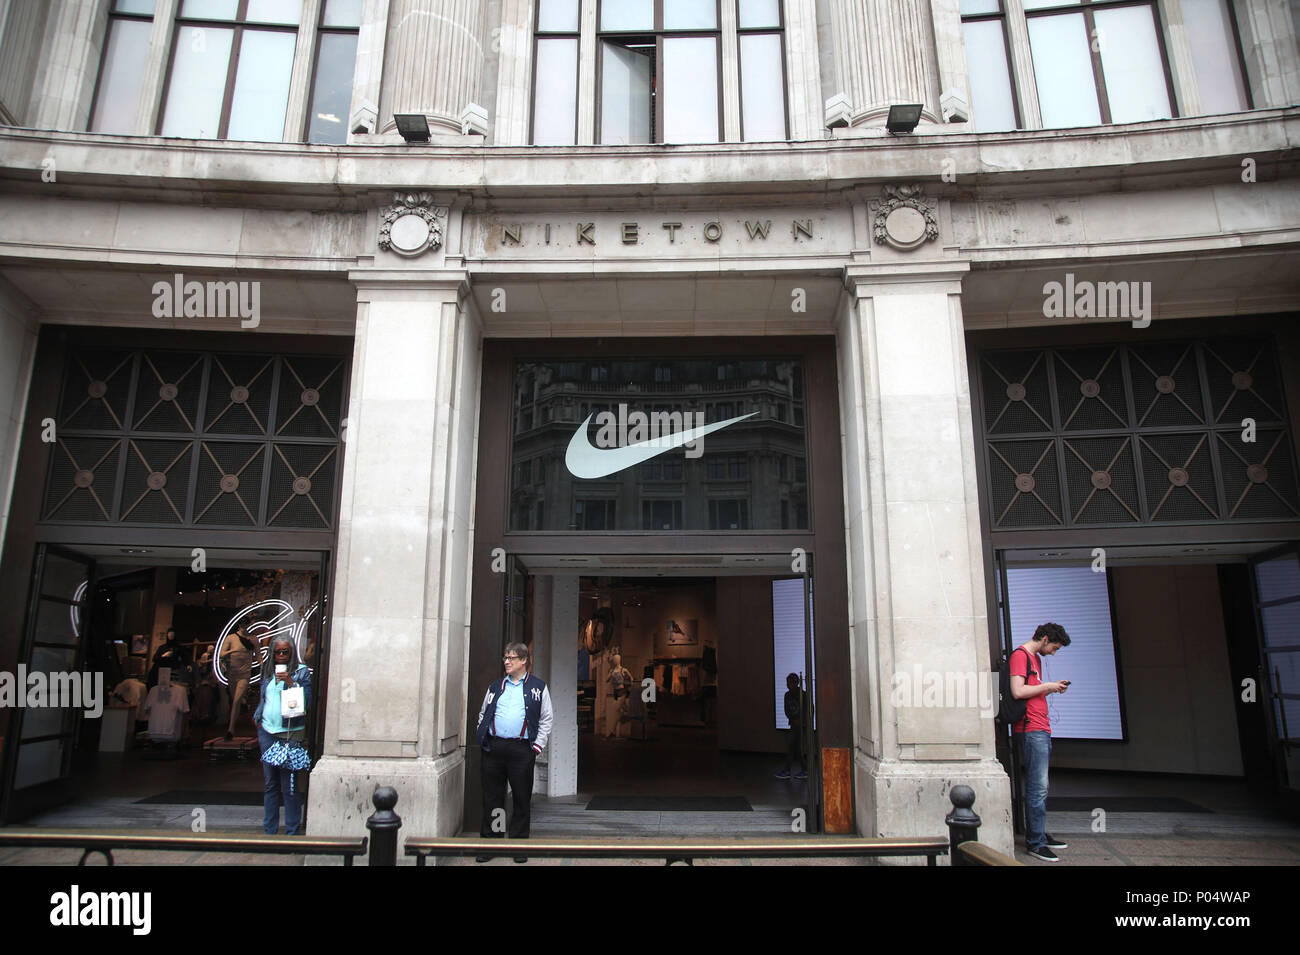 The Niketown store on Oxford Street, central London Stock Photo - Alamy